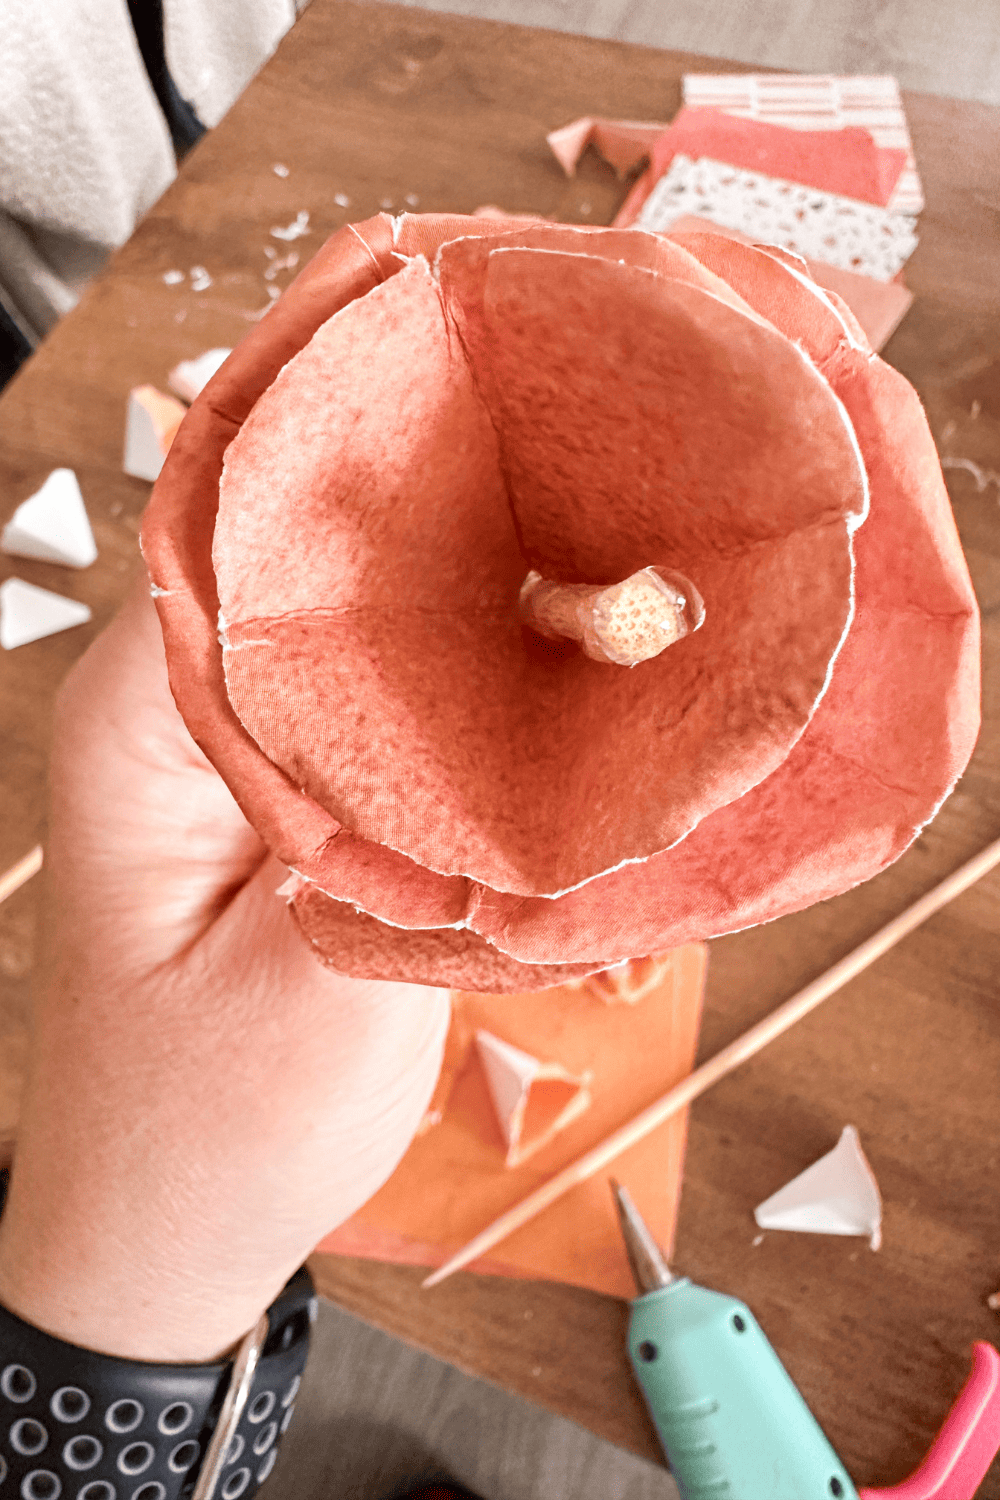 Paper rose petals started with a skewer in the middle